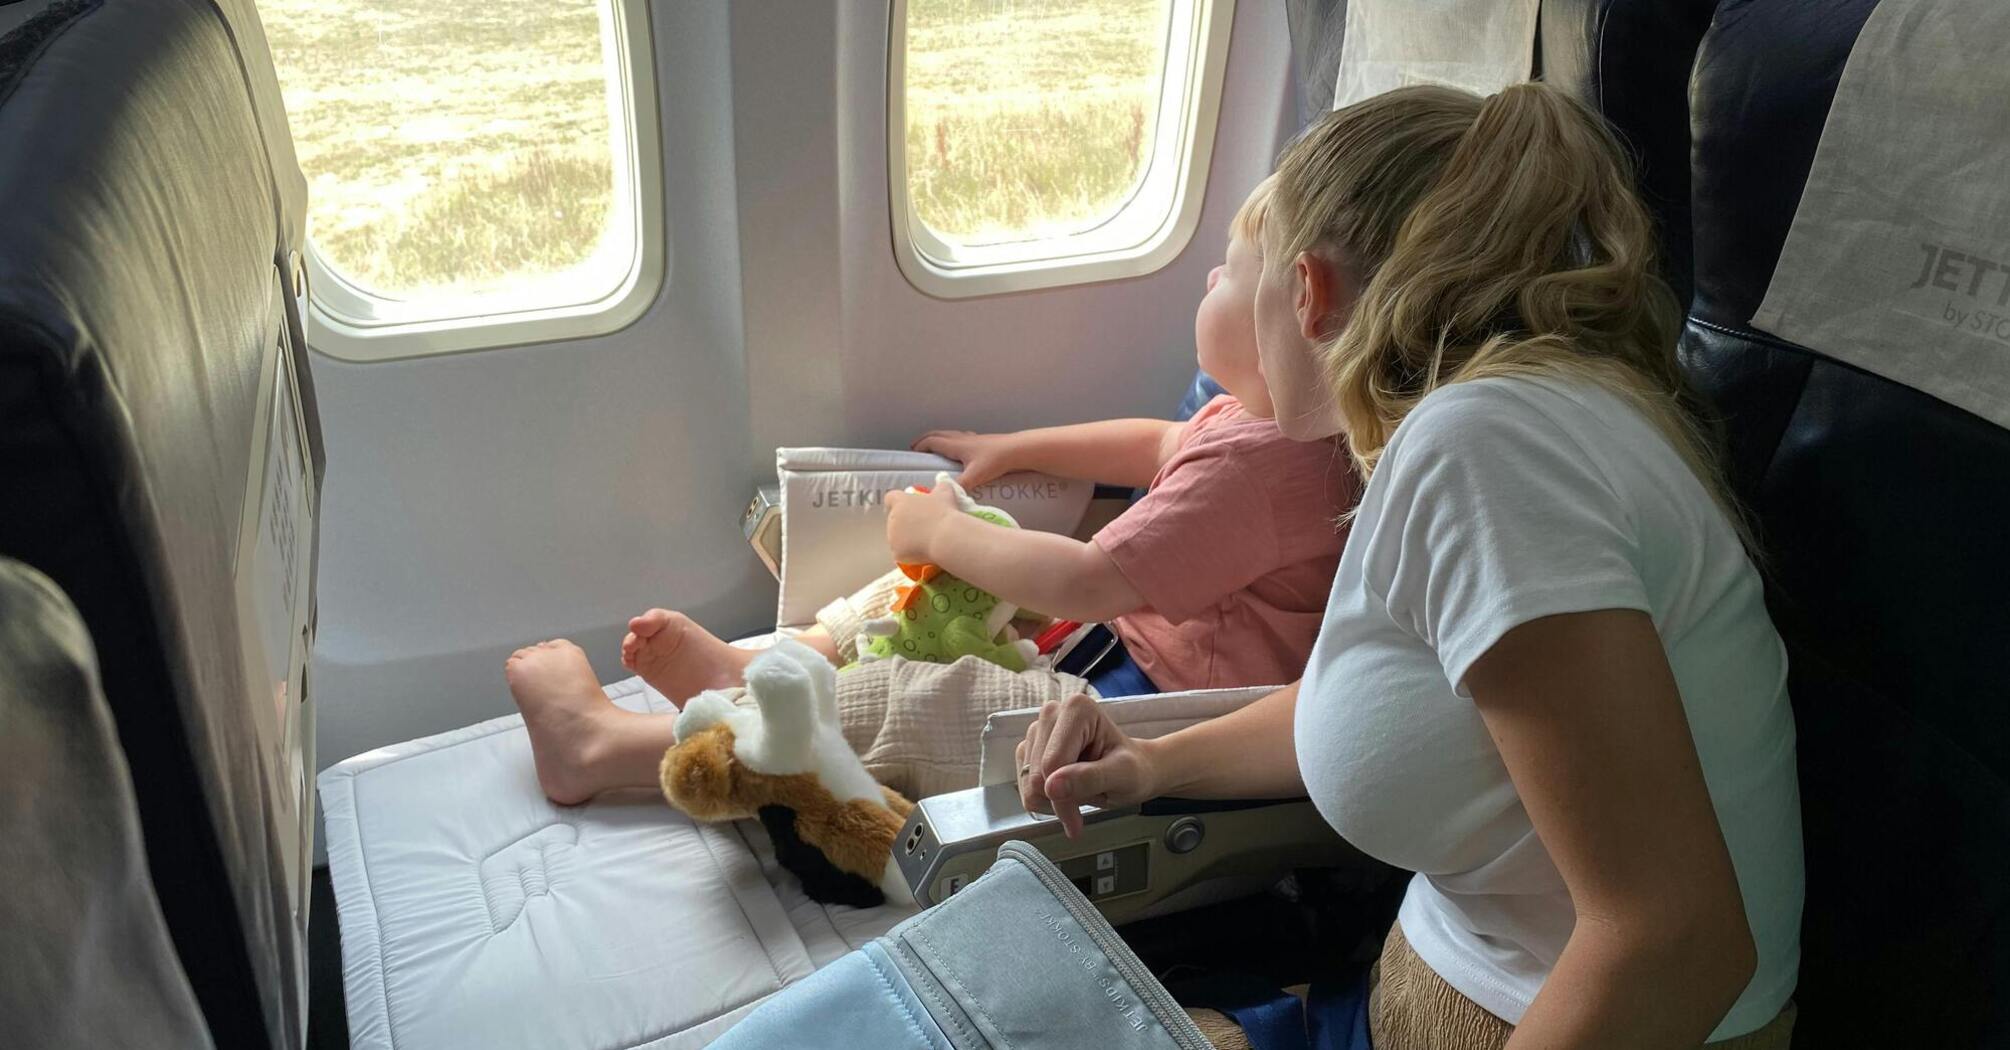 The flight attendant shared a life hack on how to calm down a child on the plane